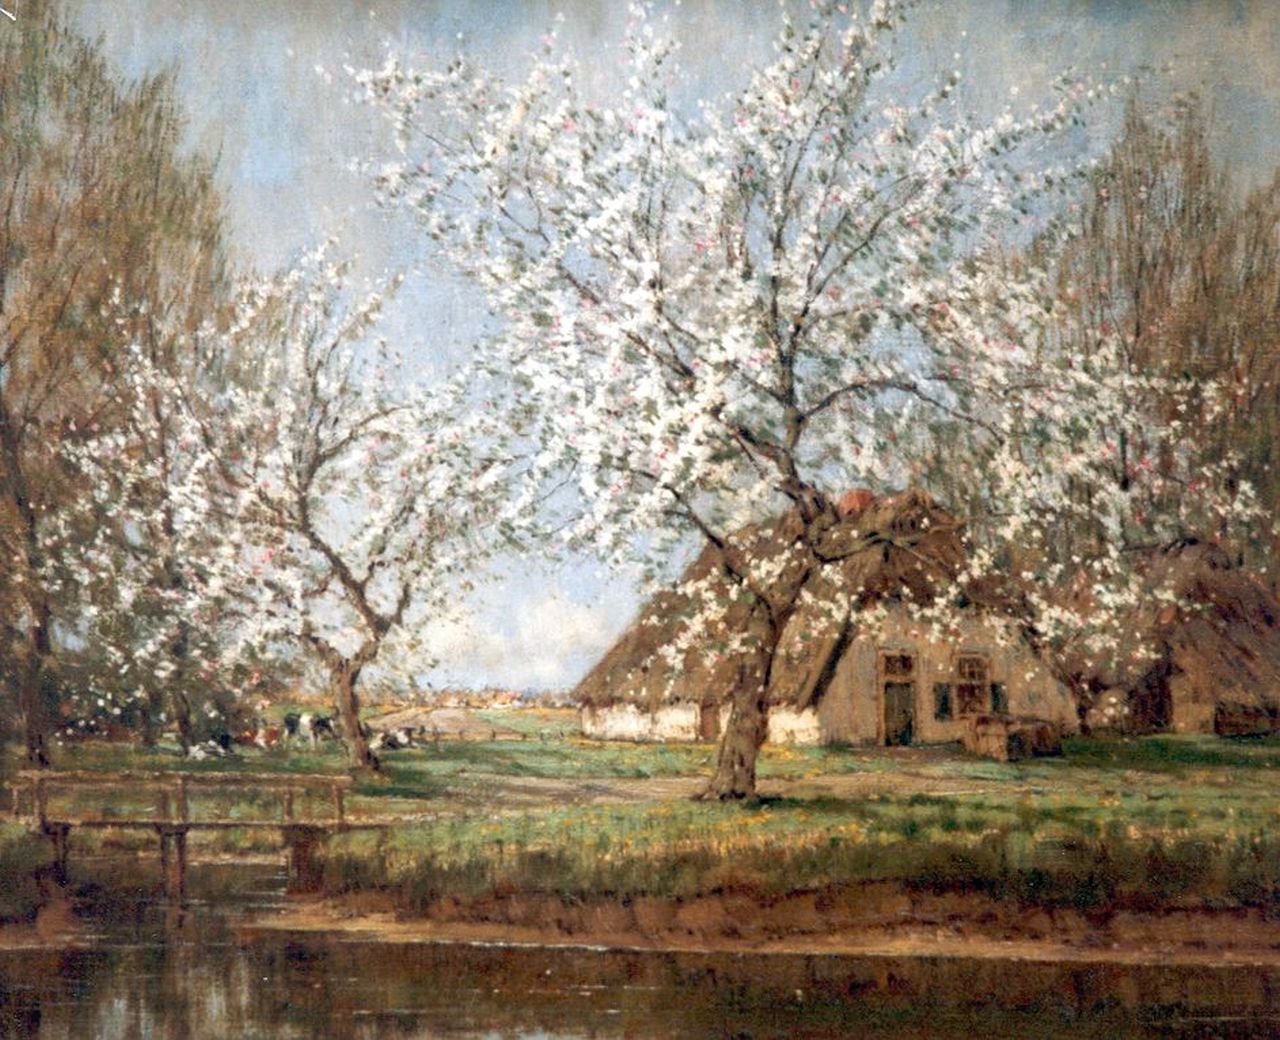 Gorter A.M.  | 'Arnold' Marc Gorter, Blossoming trees, oil on canvas 56.3 x 76.3 cm, signed l.r.